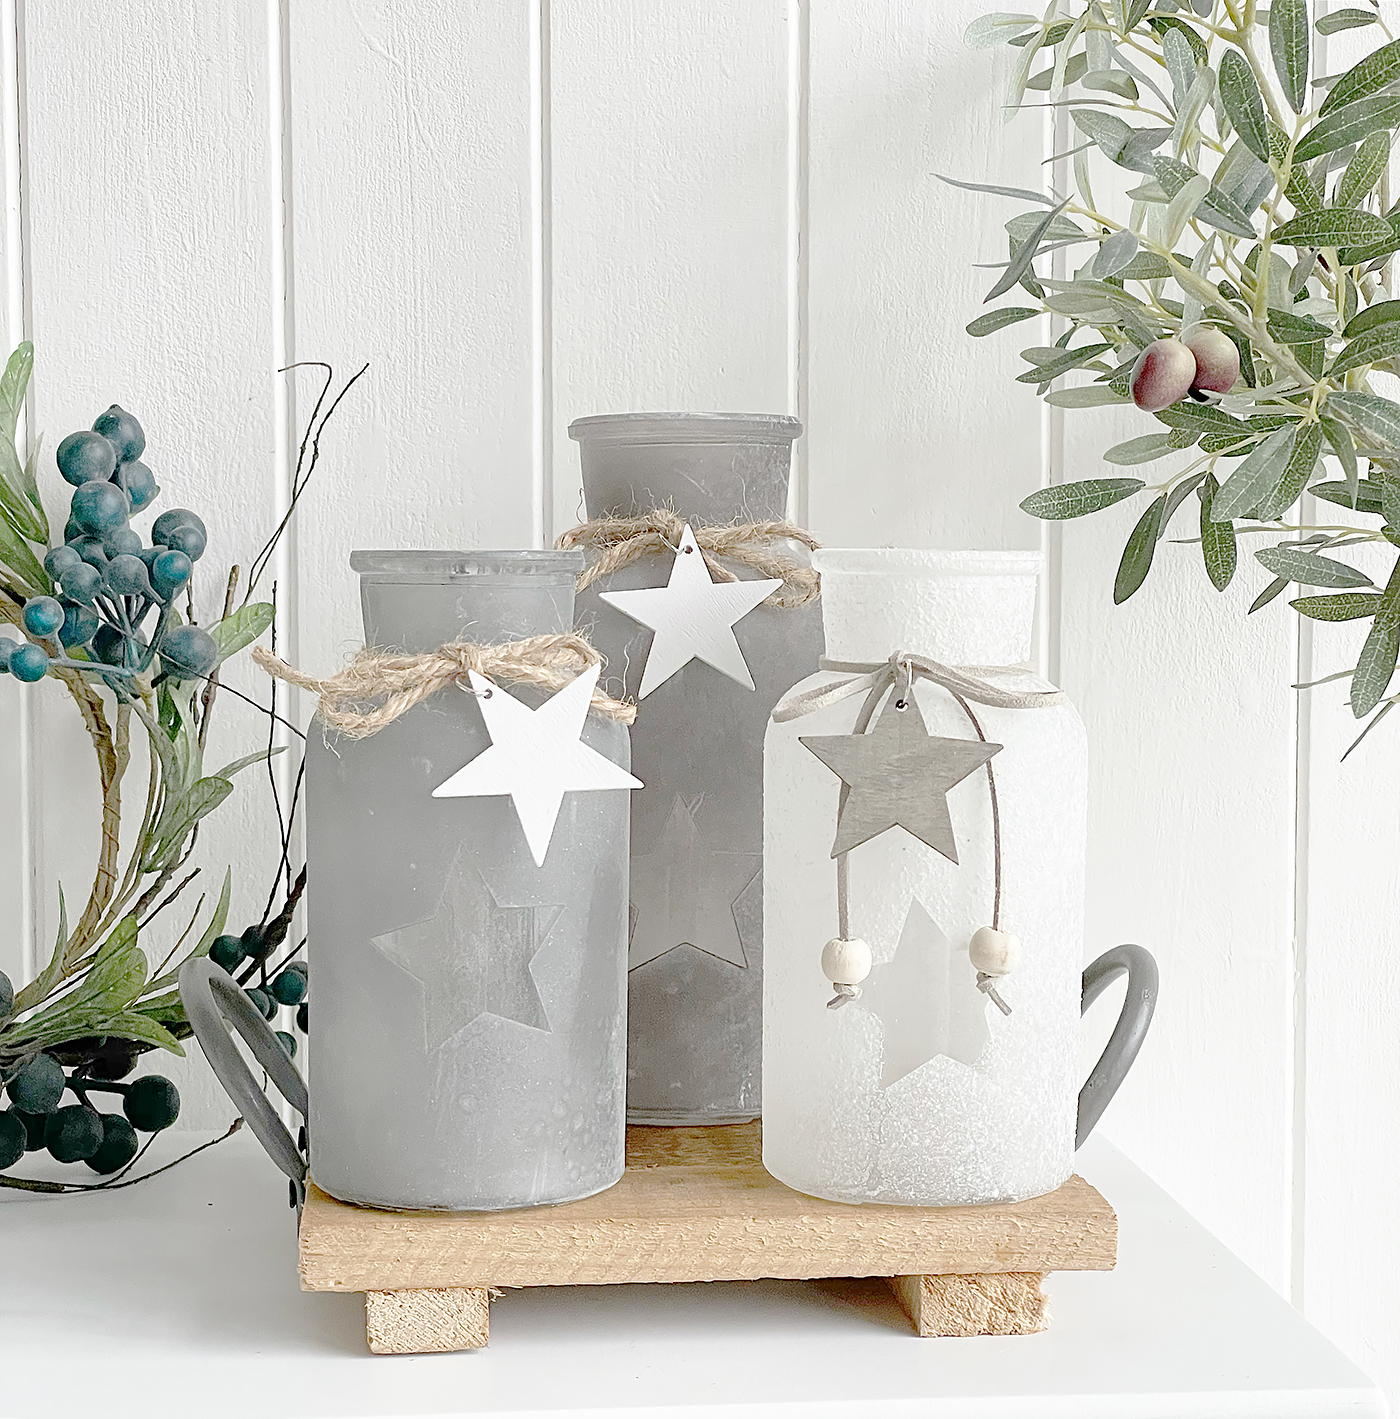 Grey and white star bottles for New England home interiors for coastal and cottage furniture